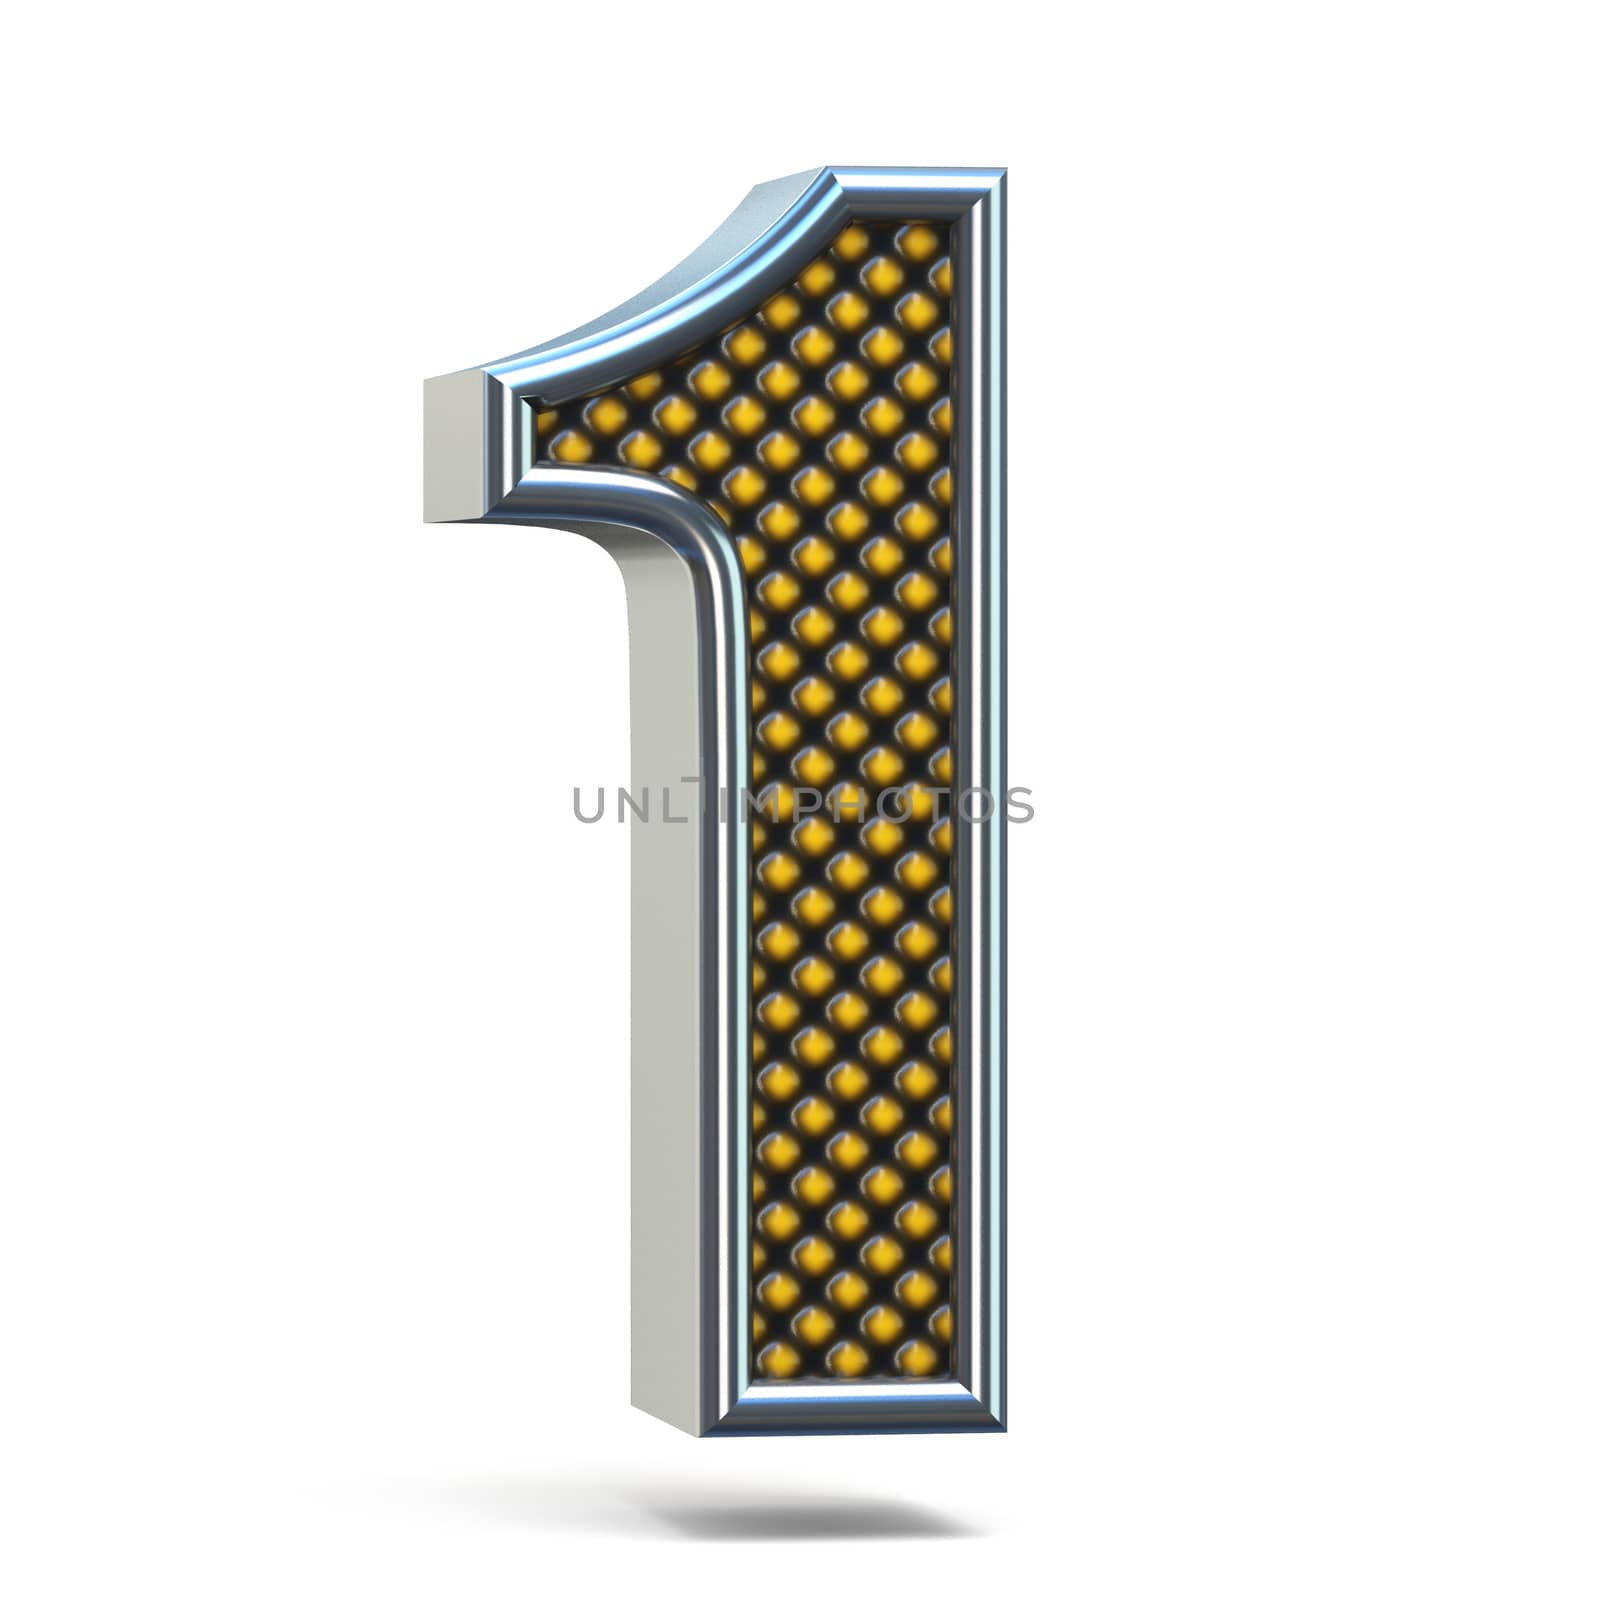 Chrome metal orange dotted font Number ONE 1 3D render illustration isolated on white background